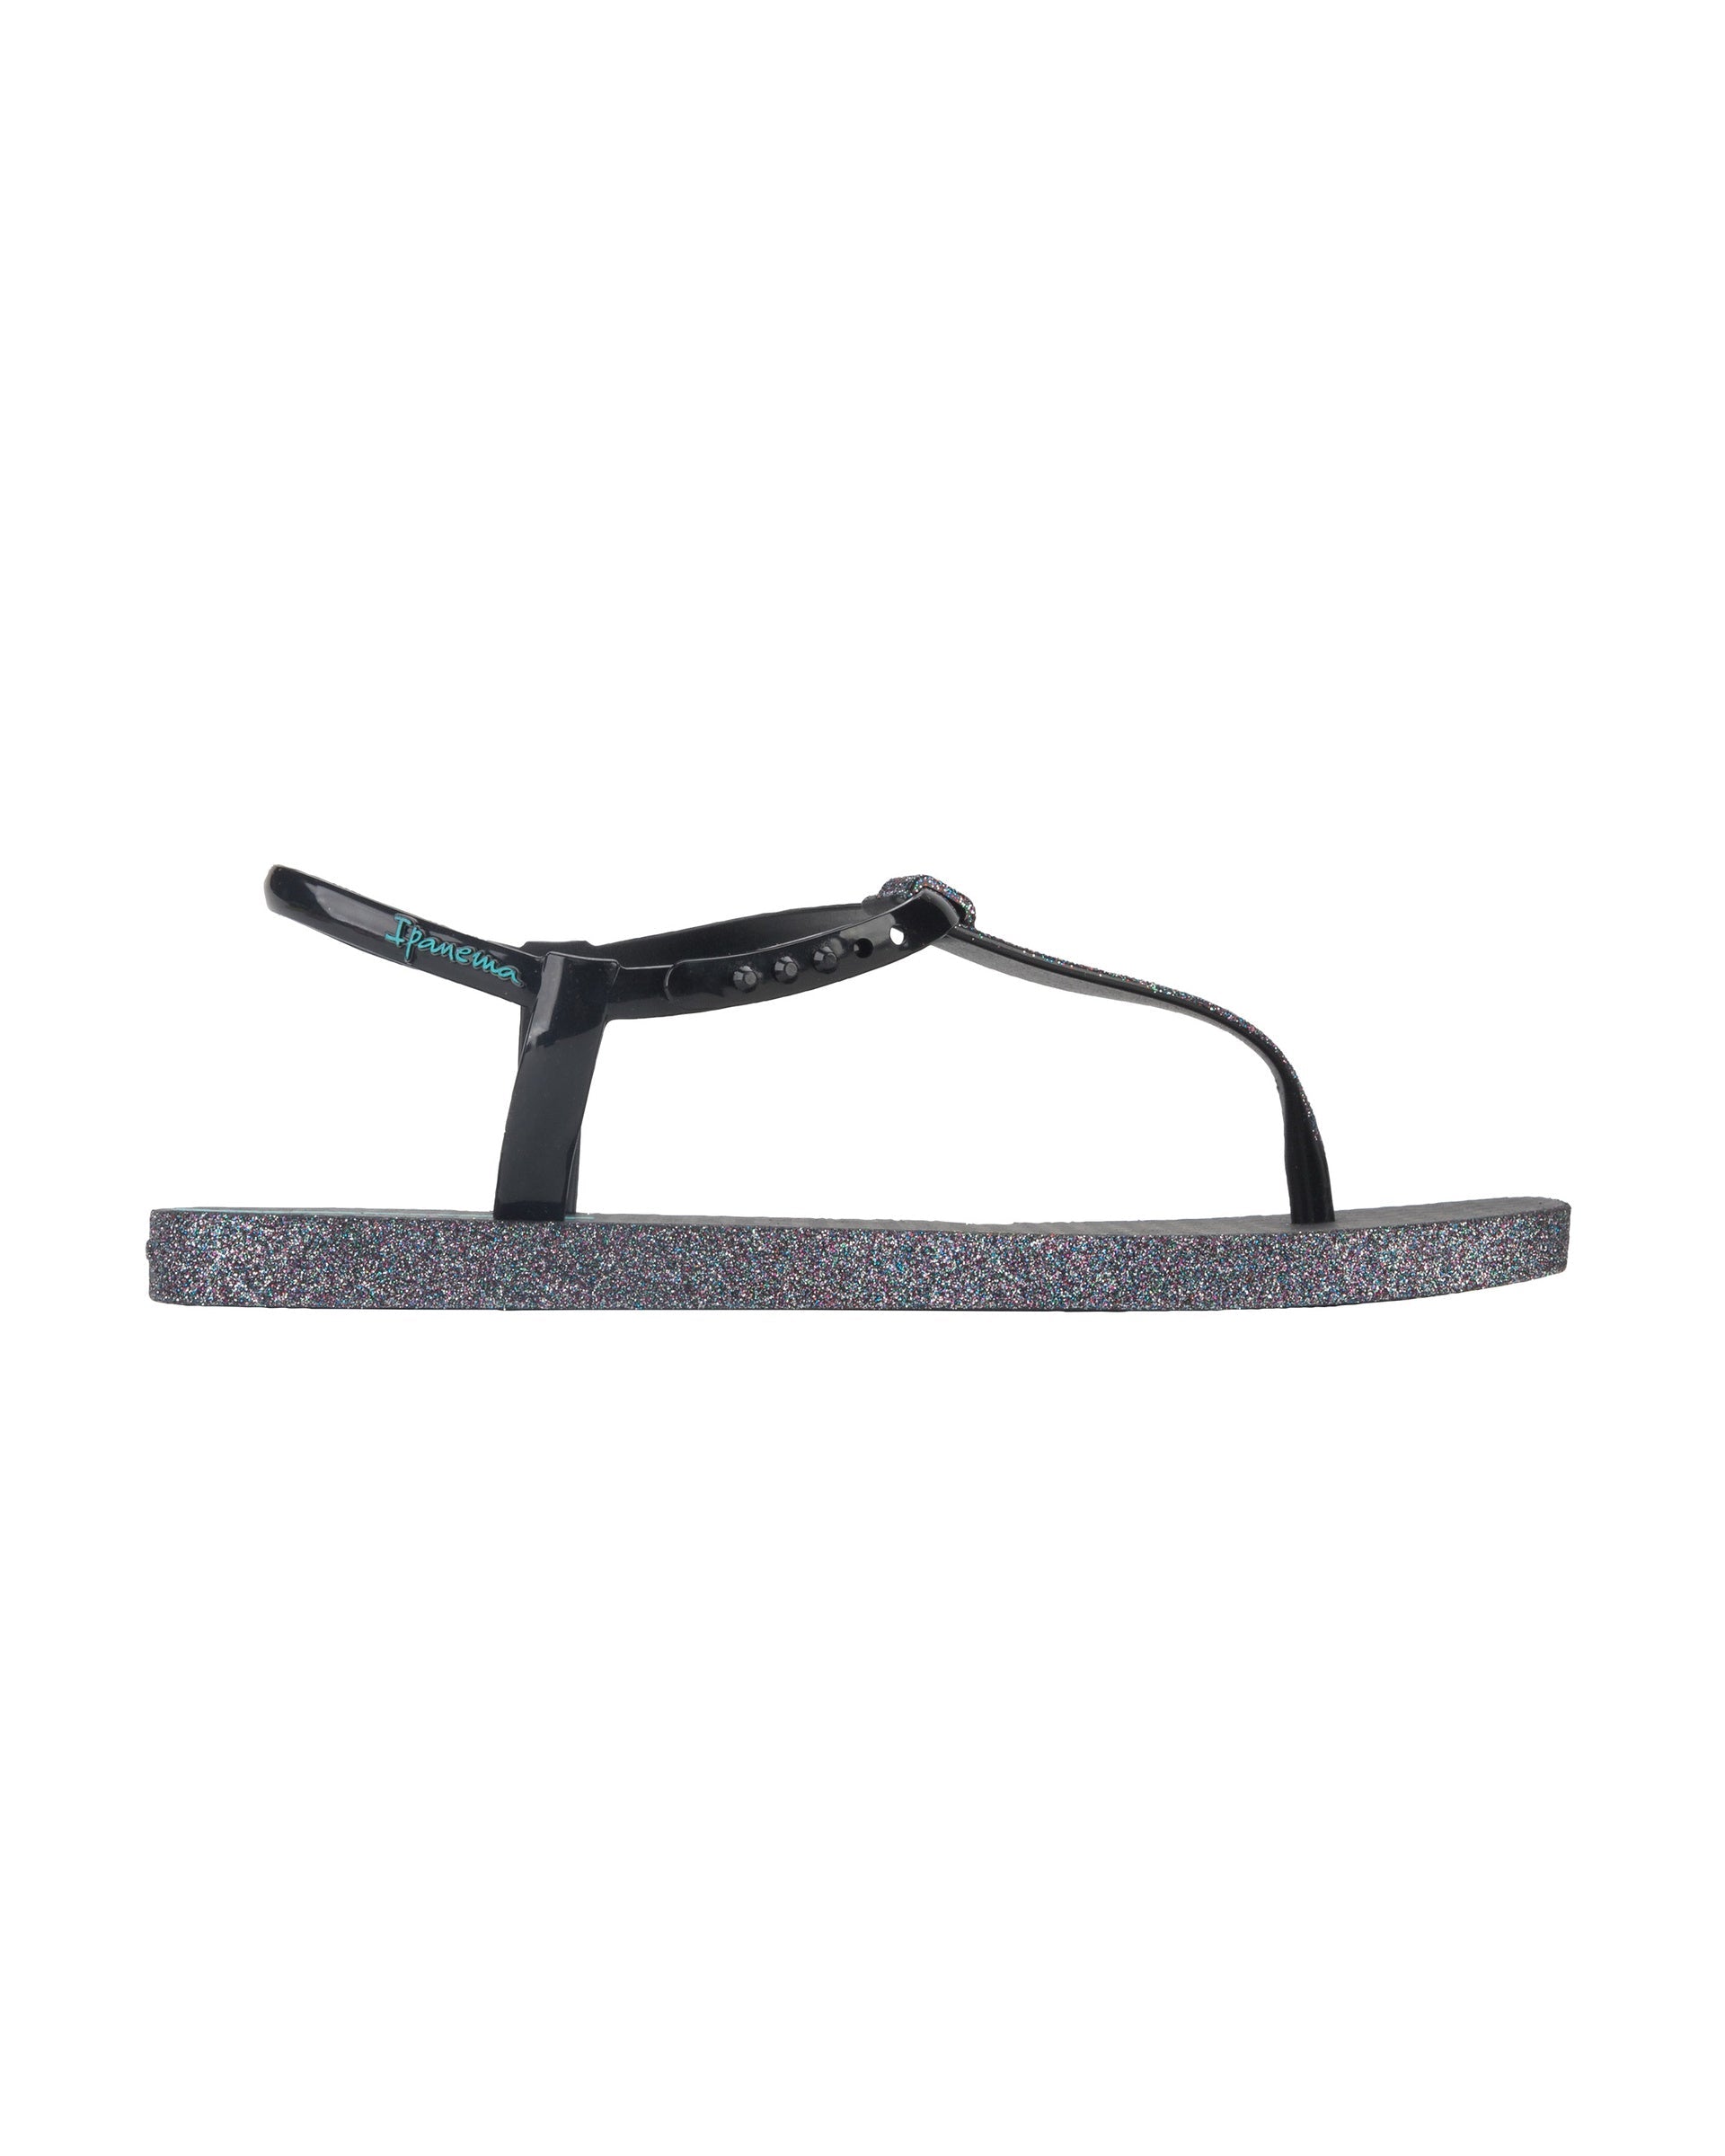 Outer side view of a black Ipanema Class Edge Glow t-strap women's sandal with glitter black thong.